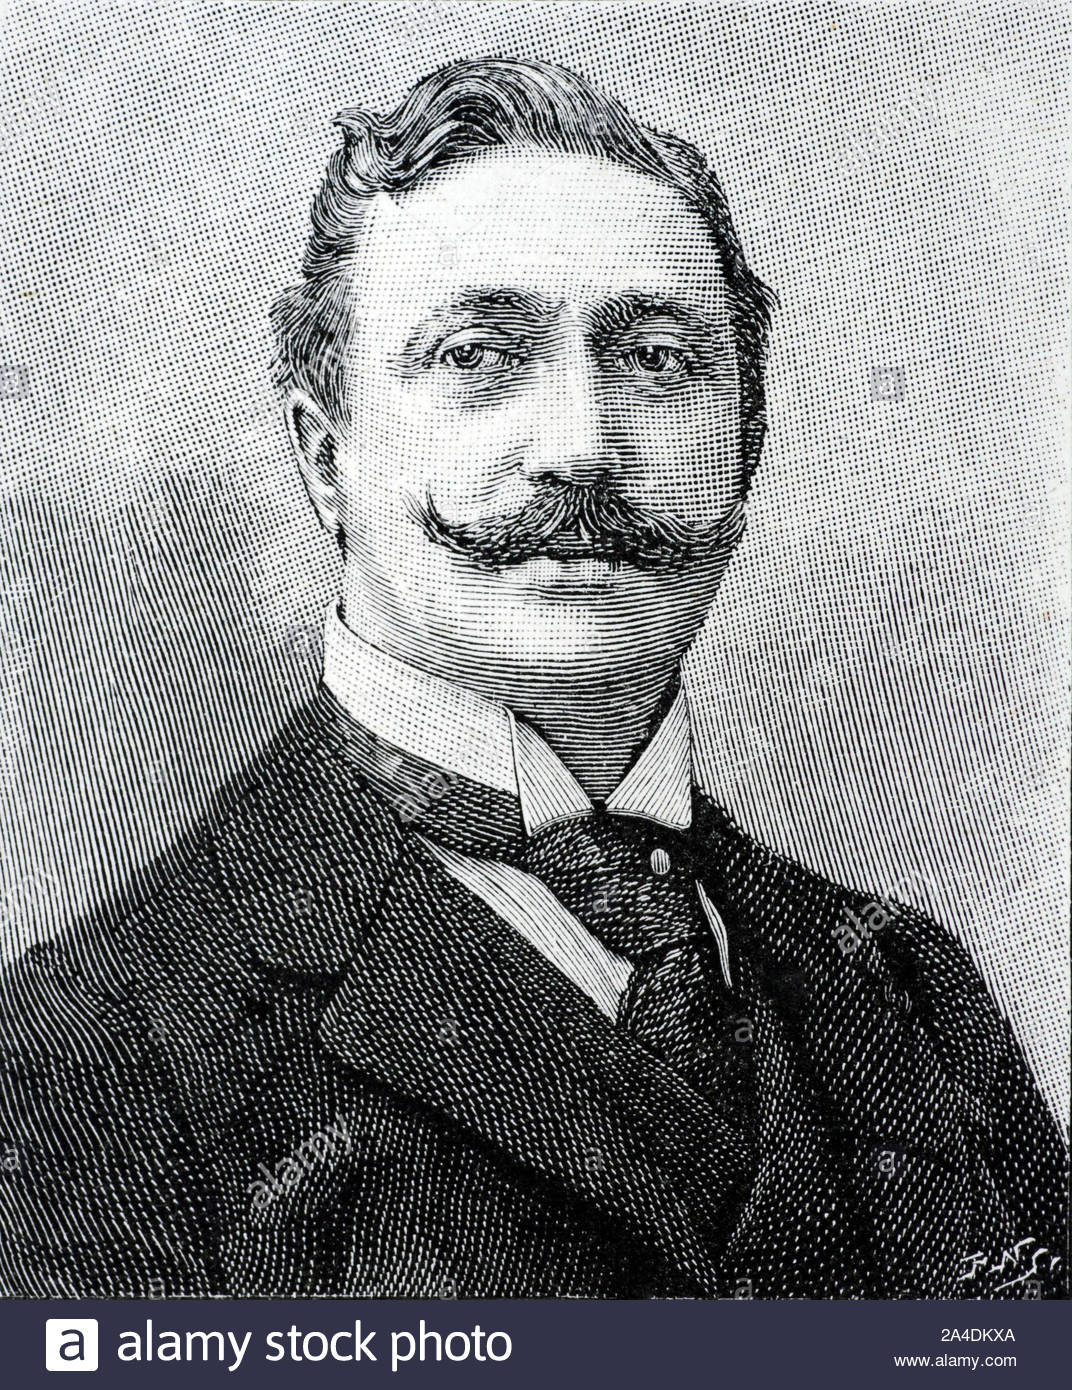 Jean-Baptiste Édouard Detaille portrait, 1848 – 1912,  was a French painter and military artist, vintage illustration from 1895. Shown here aged 47. Stock Photo